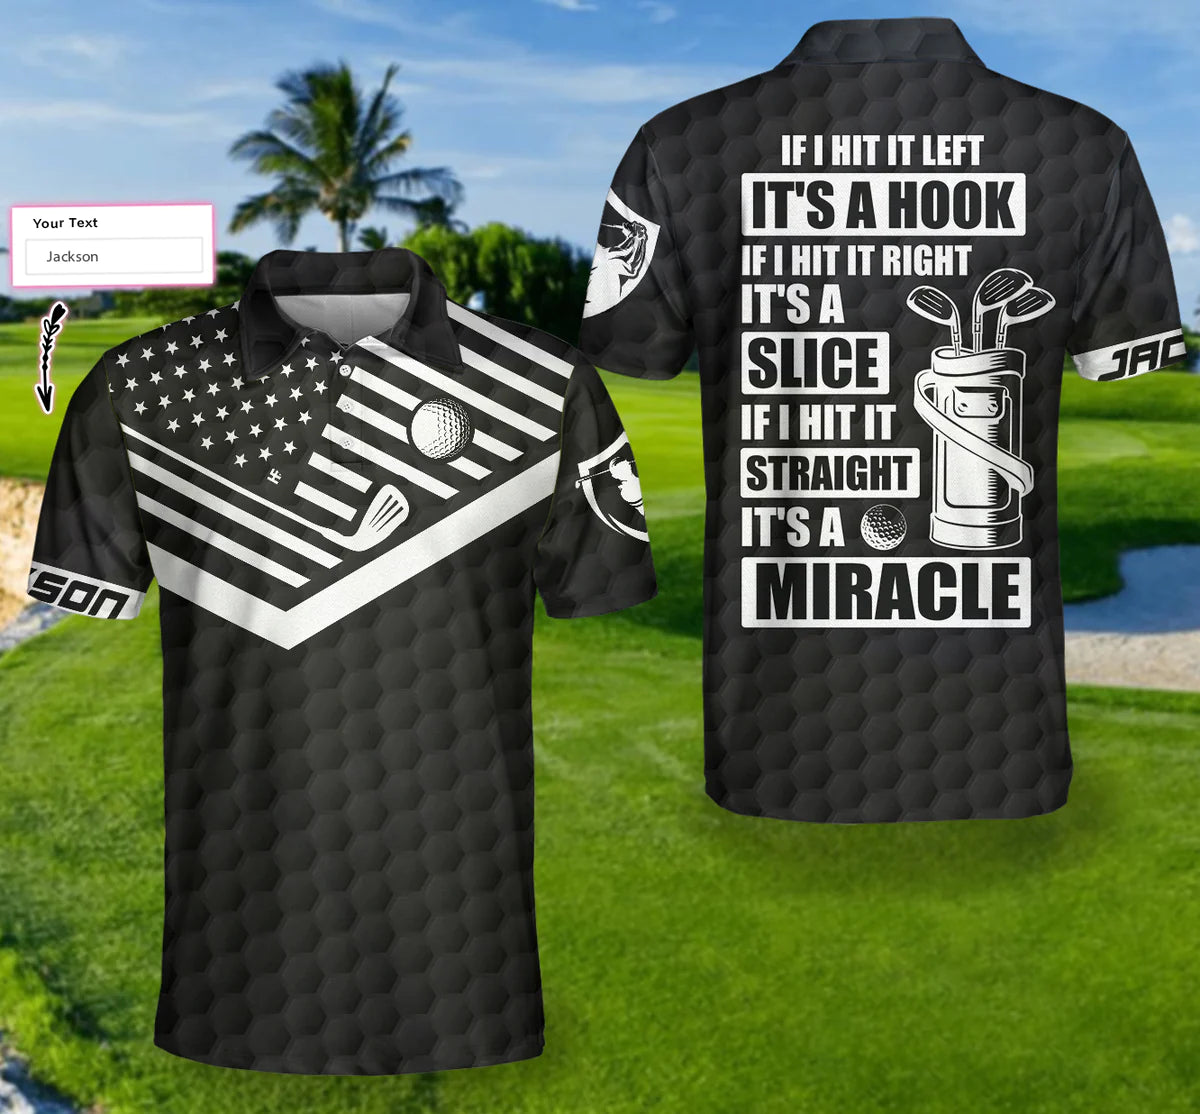 mens golf polo shirt with custom design featuring left hitting black american flag a humorous addition to your golfing attire gp415 5qvhm